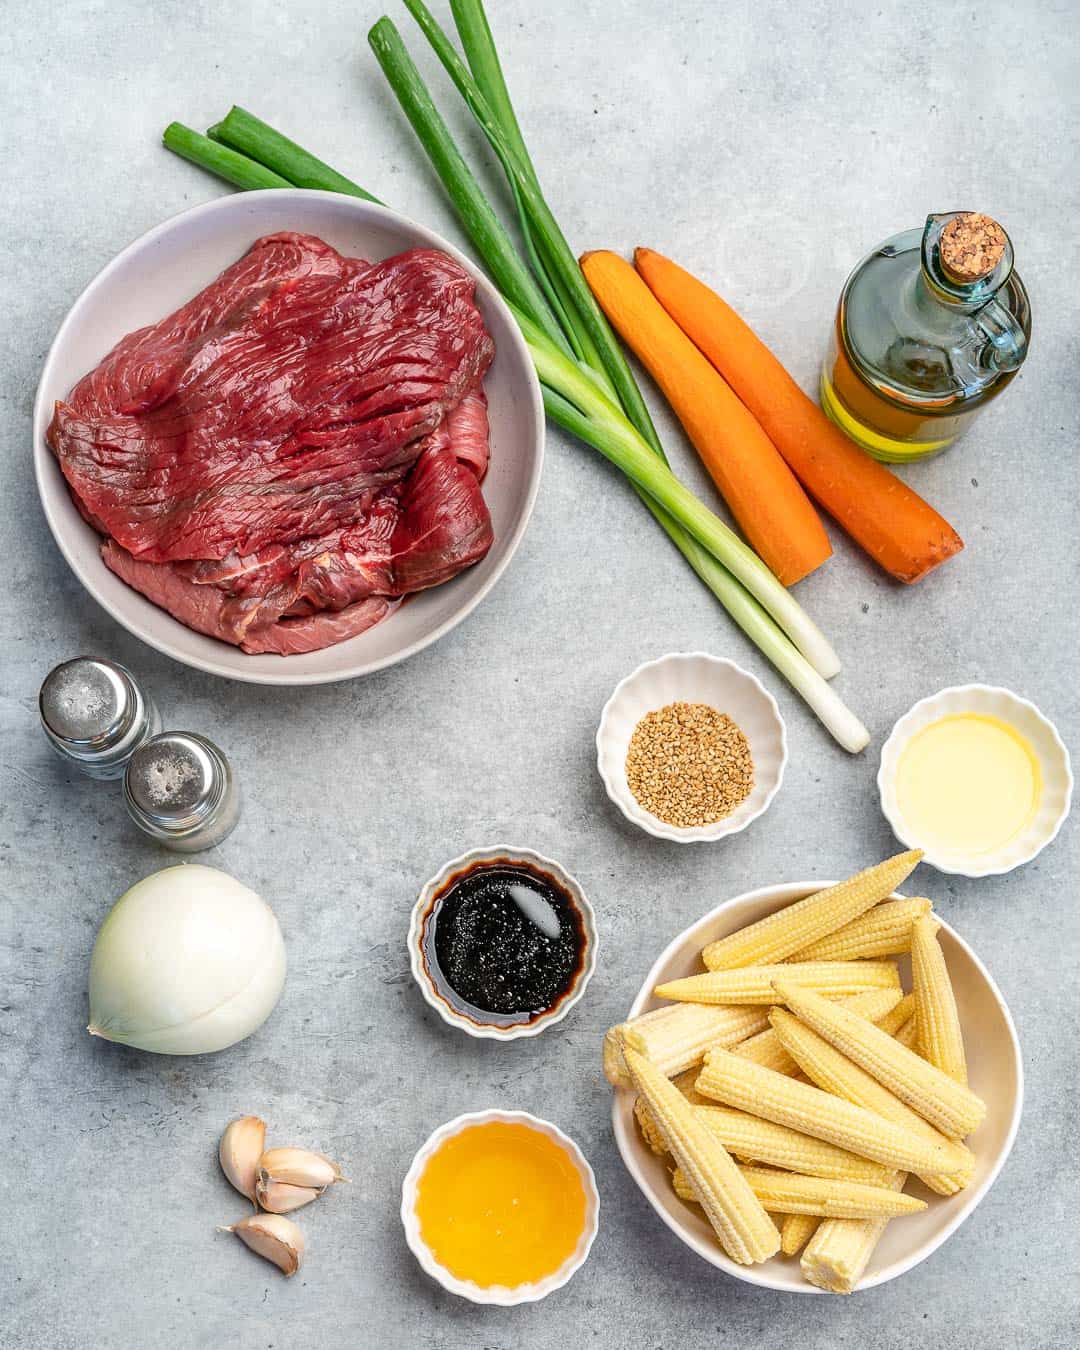 Ingredients for beef stir fry on counter